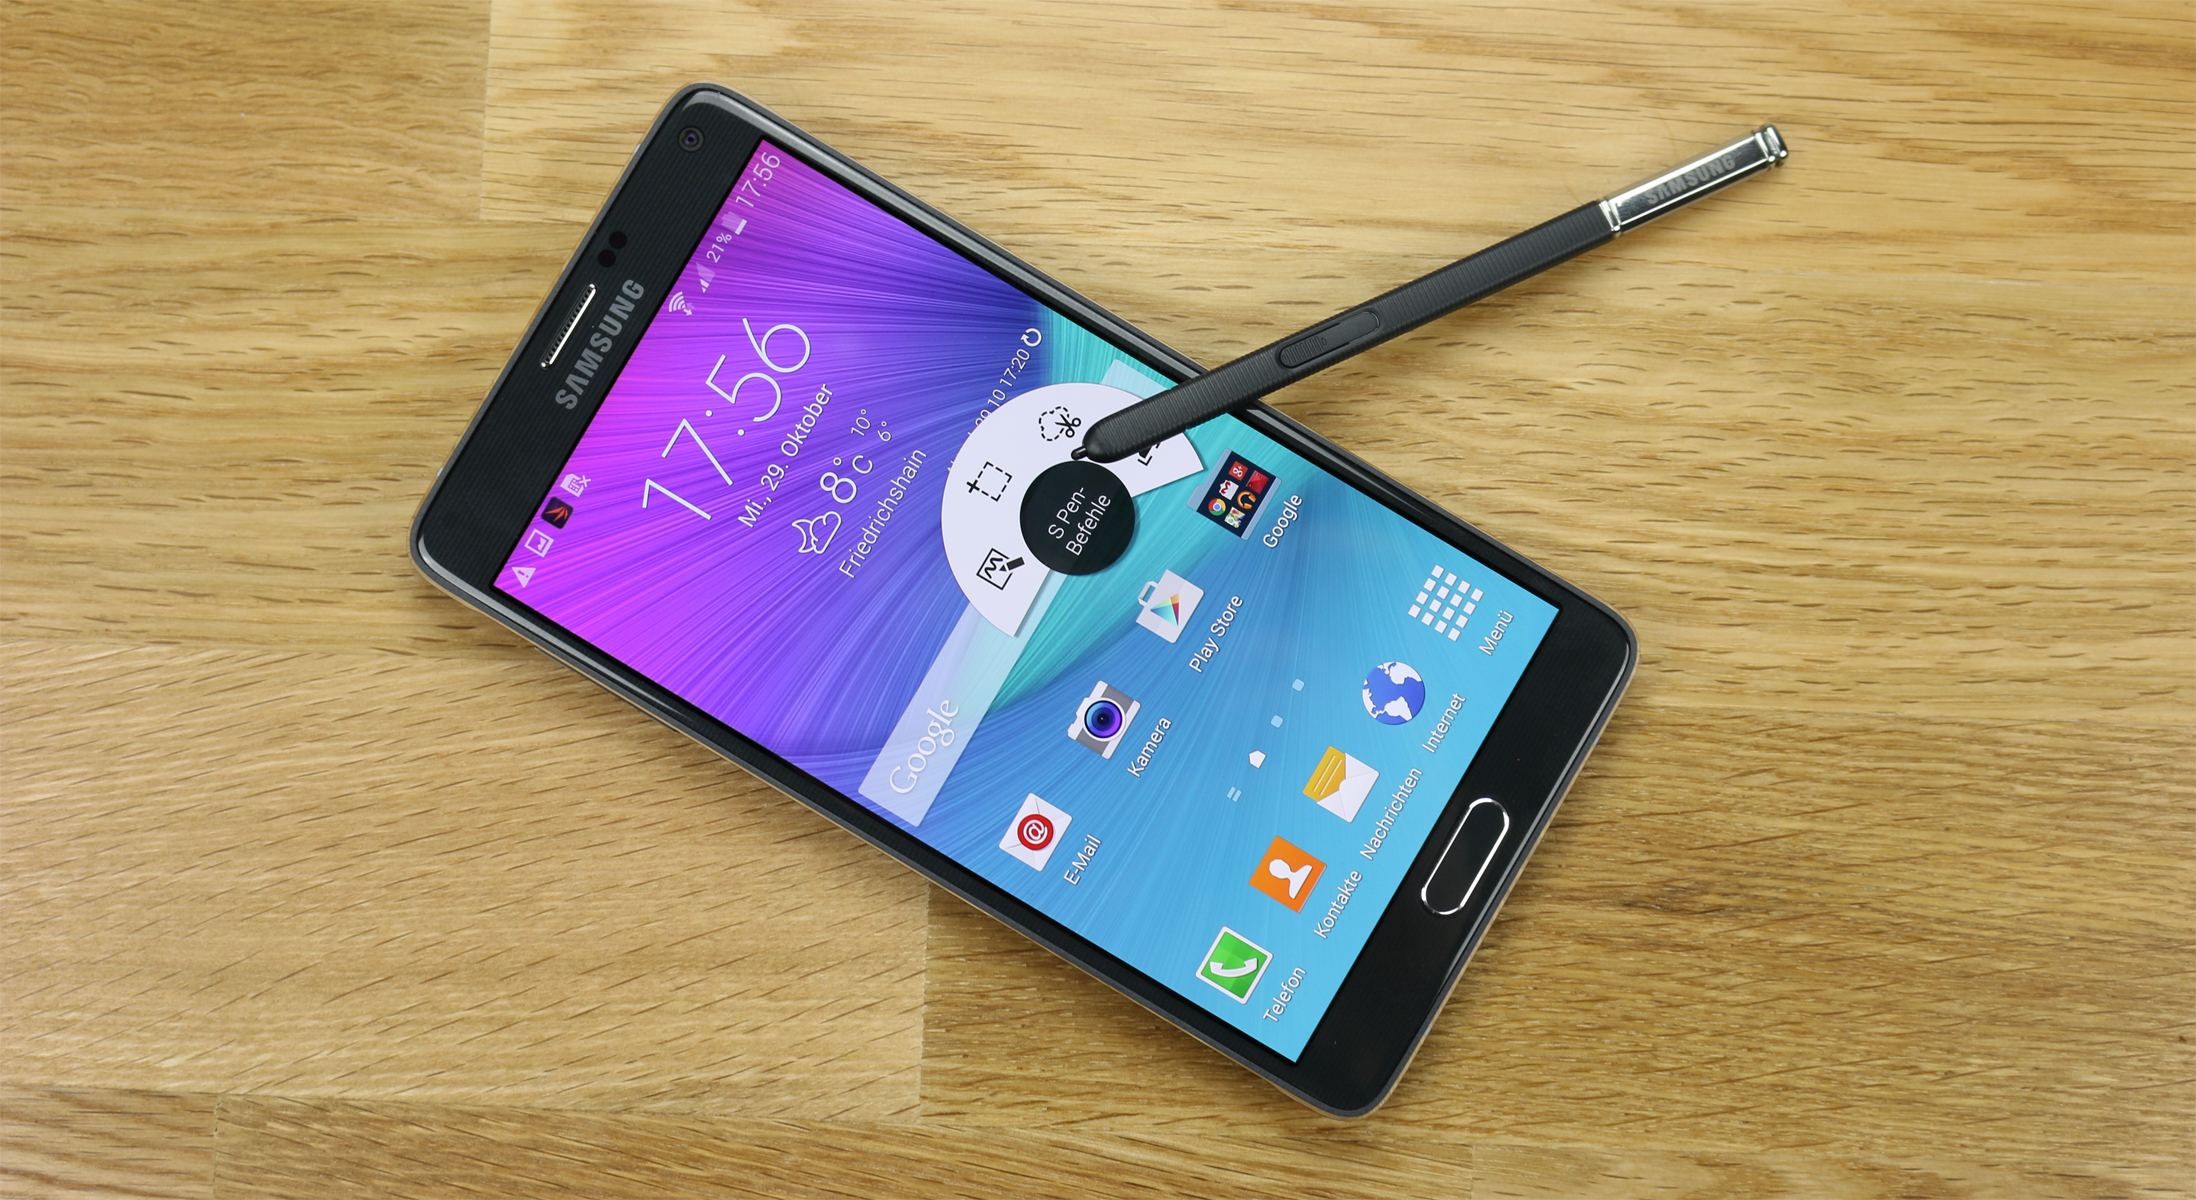 Samsung Galaxy Note 4 Starts Receiving Android M Update in India